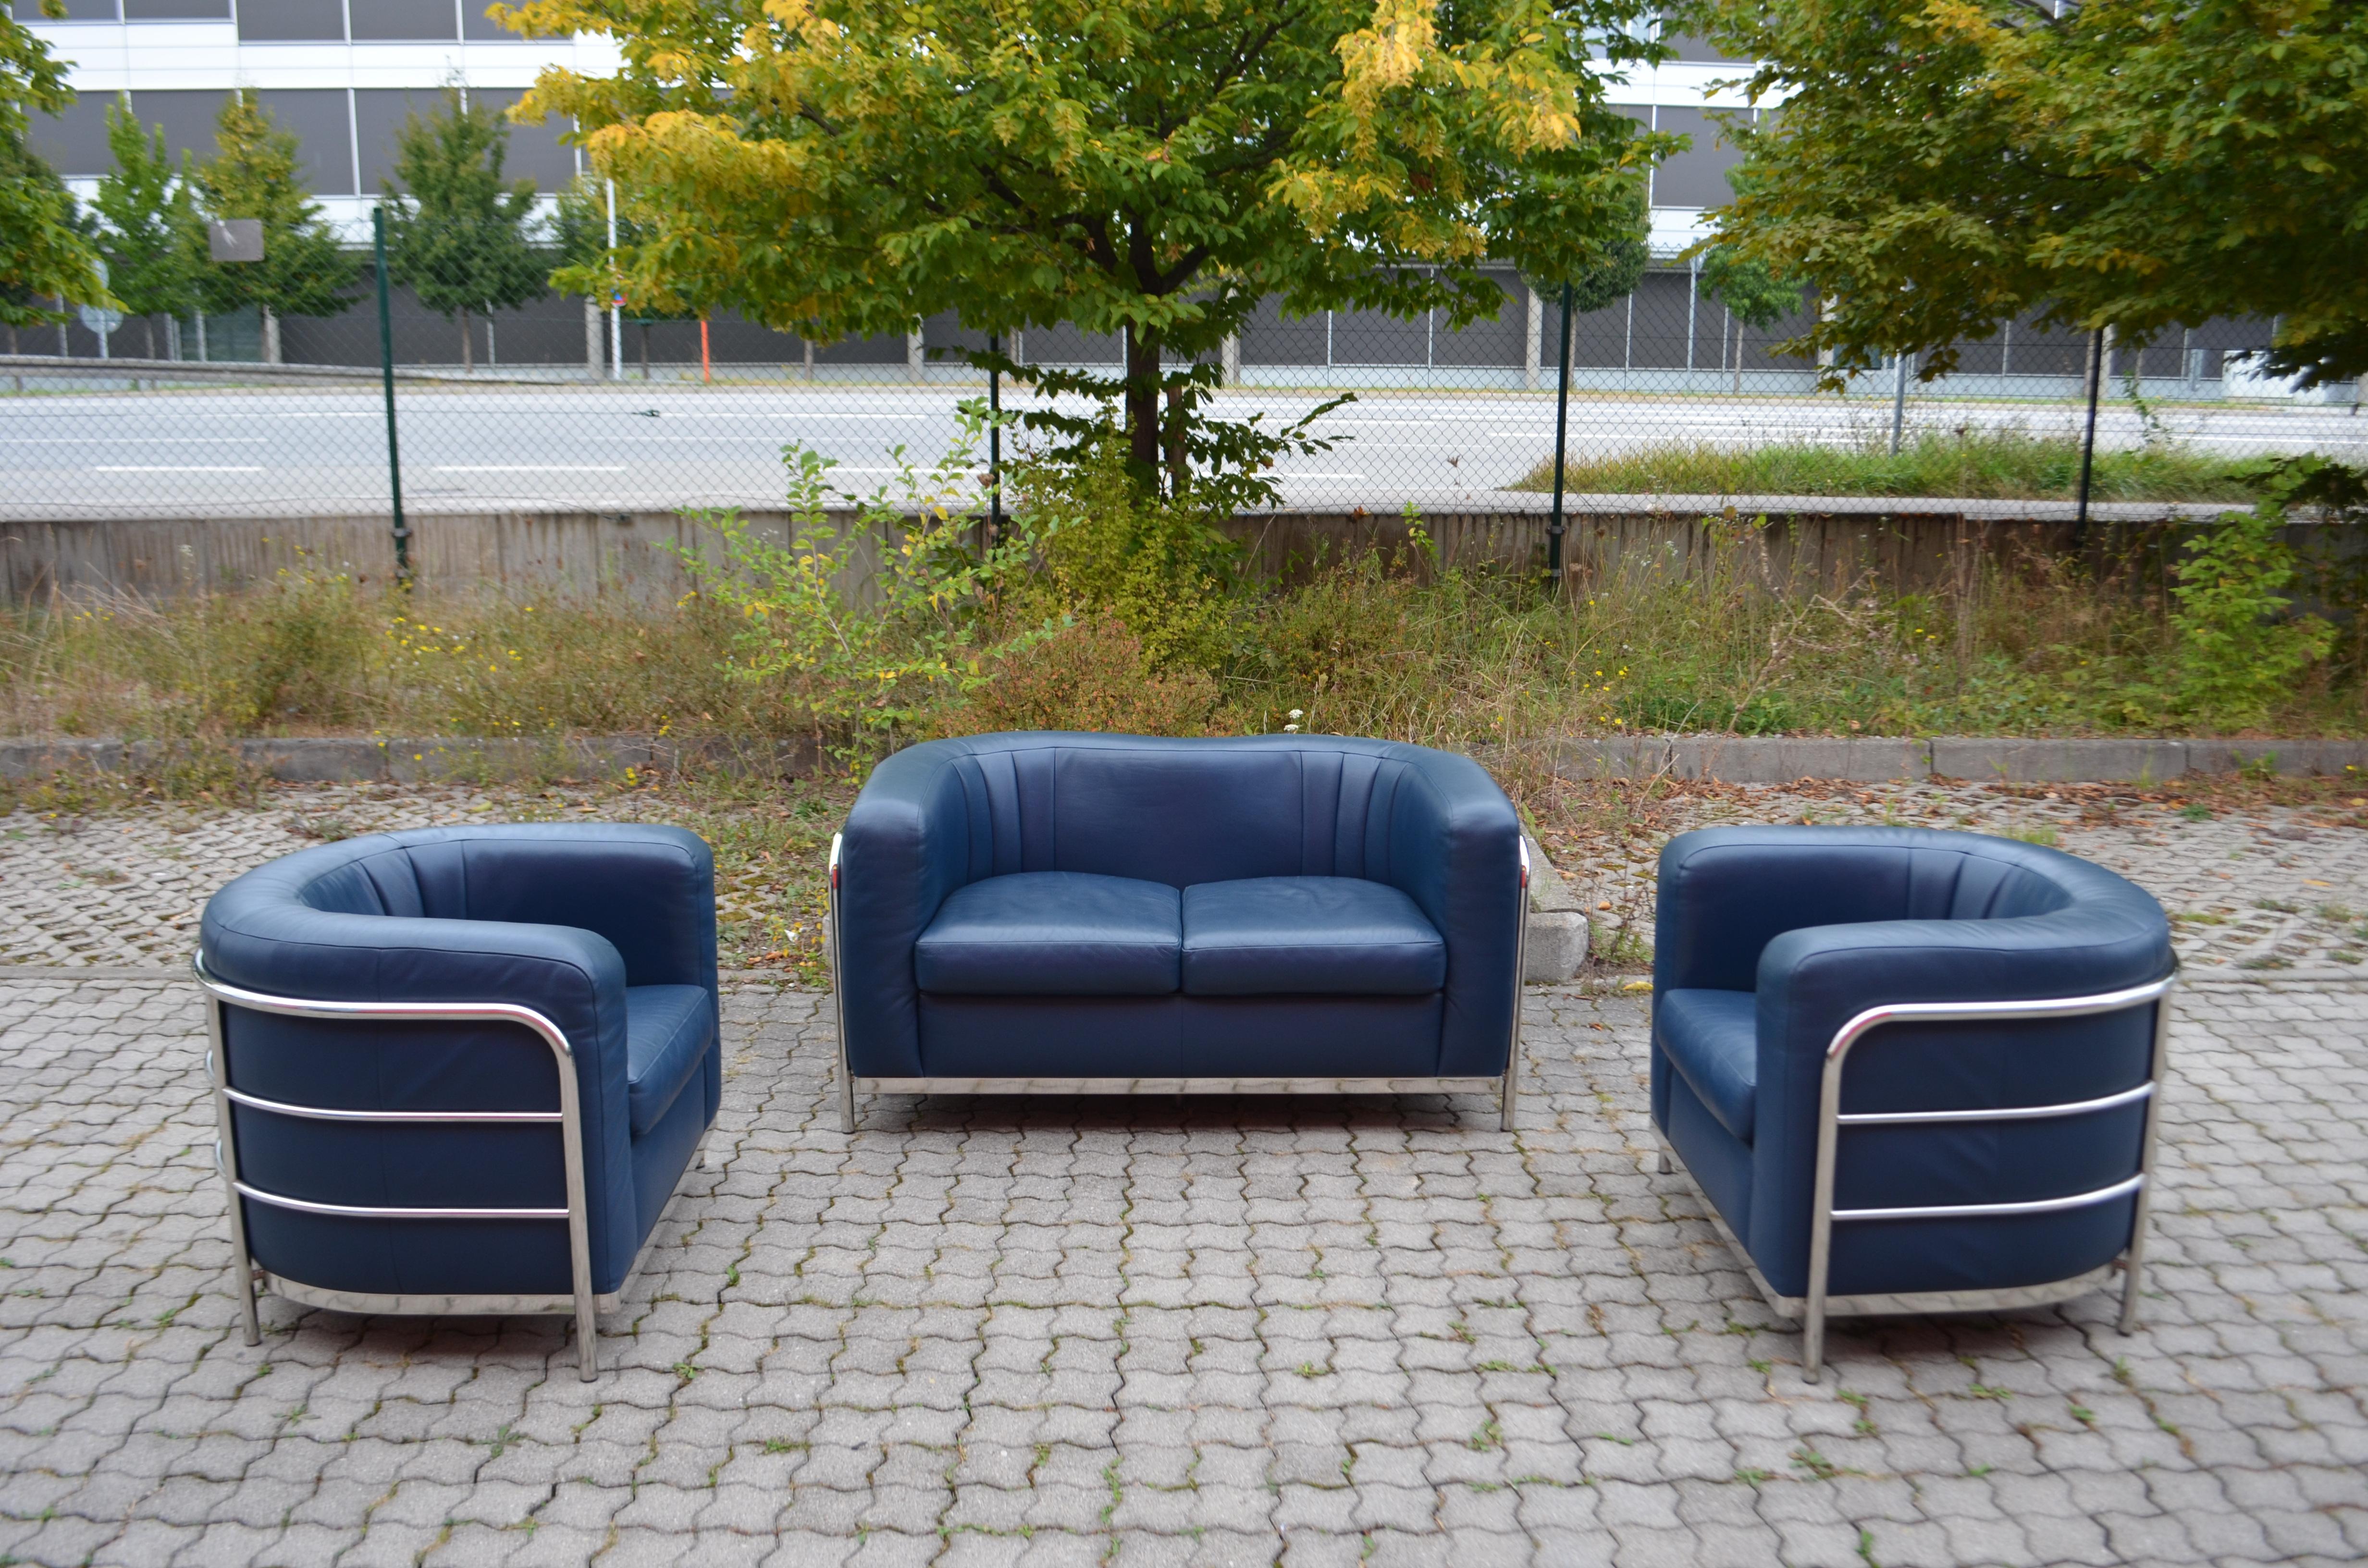 Zanotta Modell Onda. 
Design in 1985 from De Pas, D'Urbino, Lomazzi.
A italian Classic.
It consists a 2seater sofa and 2 armchairs in blue leather. Frame made in Chrom and tubular steel.
Best condition.

Measures:
Sofa 
Width 138 cm

Witdh